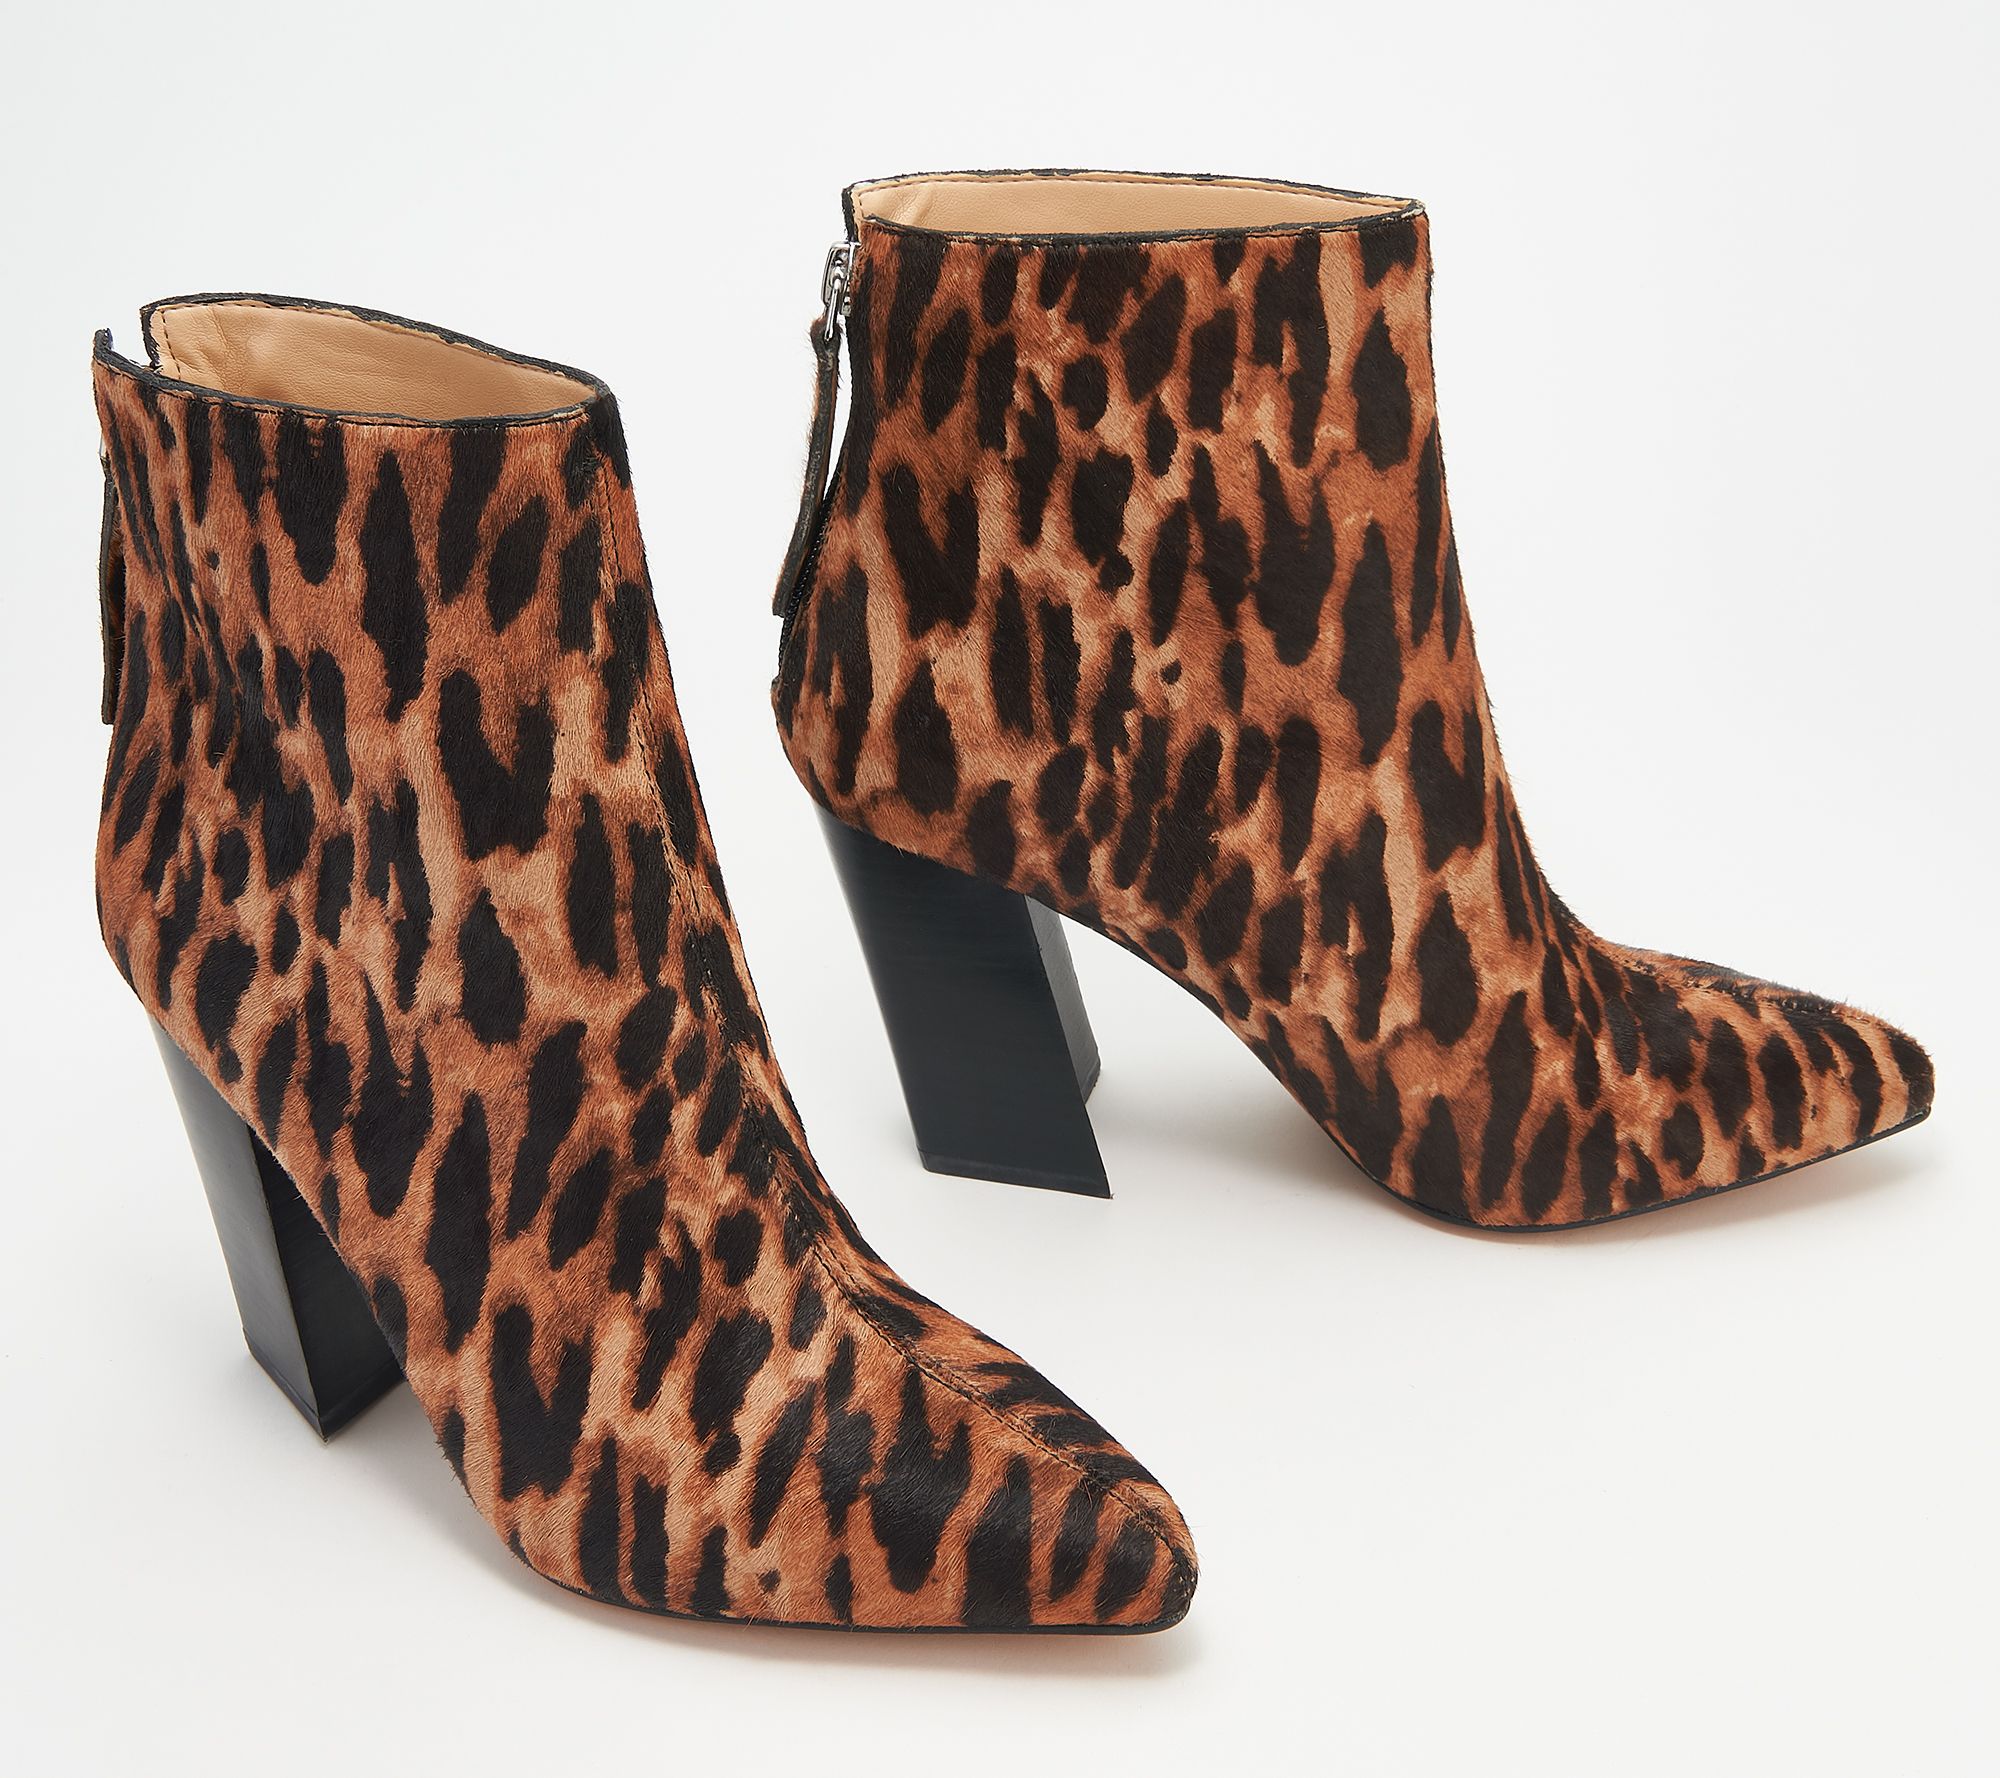 Vince Camuto Haircalf Block Heel Ankle Boots - Saavie - QVC.com